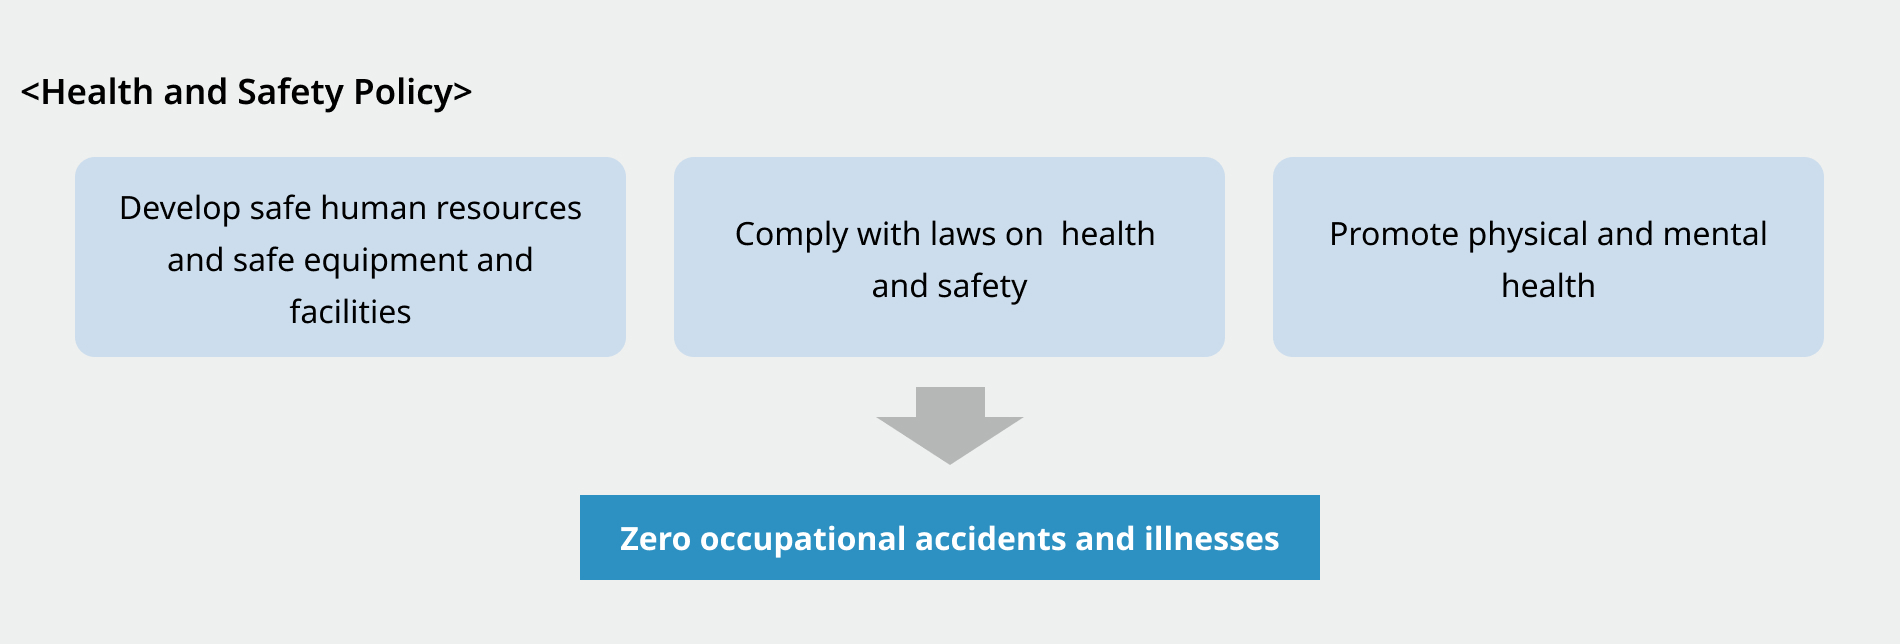 Develop safe human resources and safe equipment and facilities. Comply with laws on health and safety. Promote physical and mental health. → Zero occupational accidents and illnesses